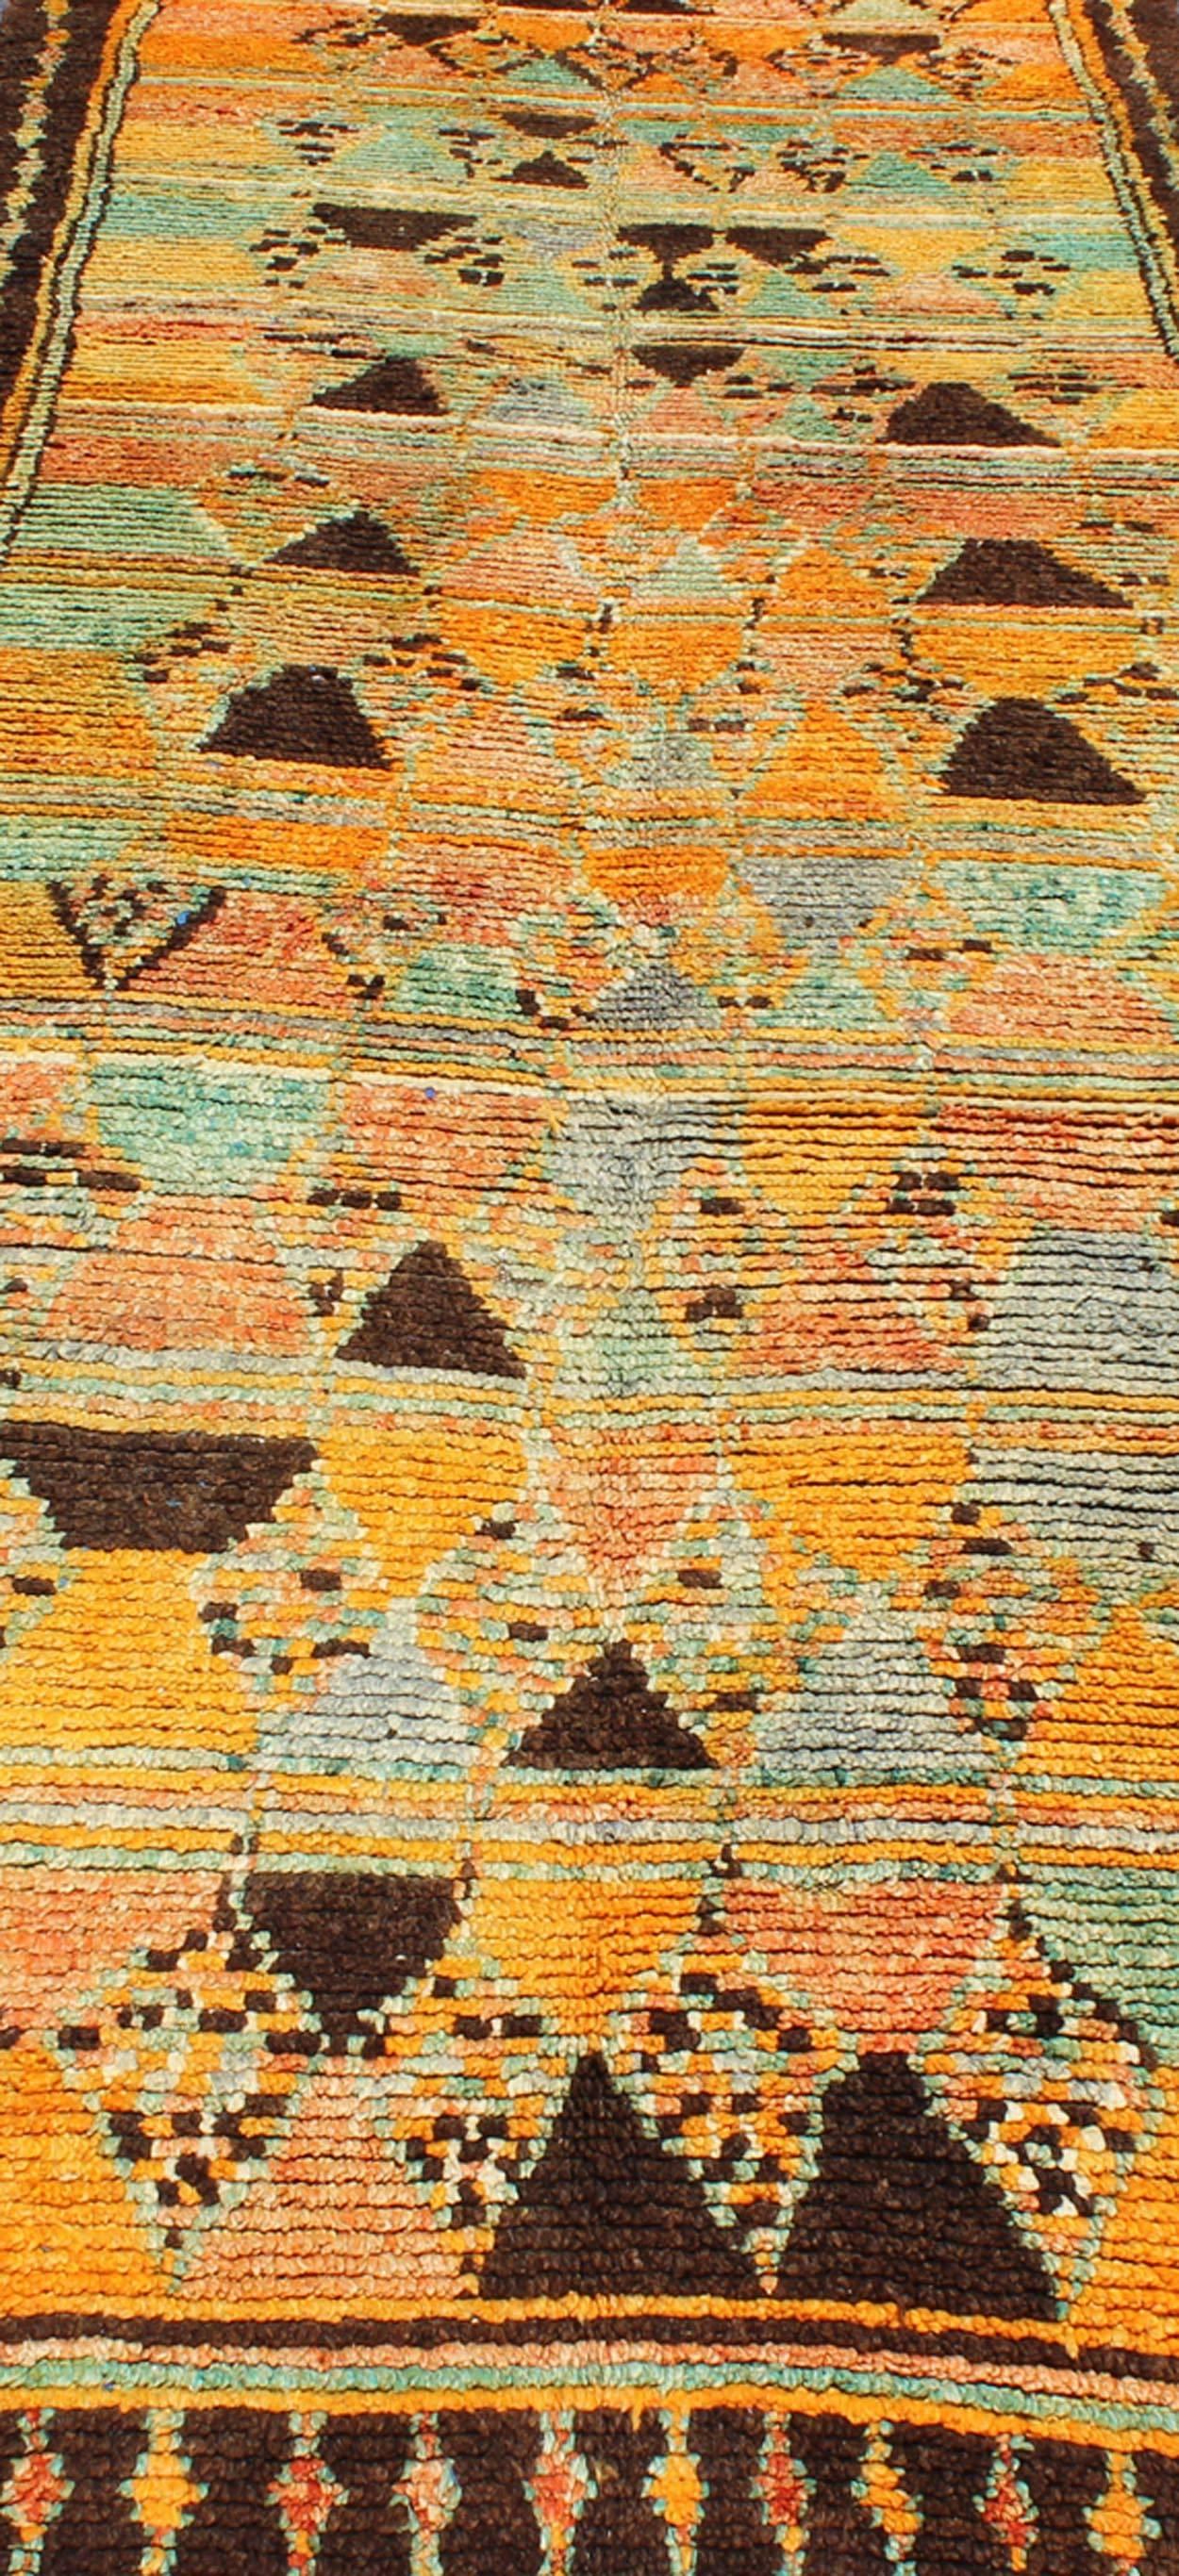 Long Vintage Moroccan Runner with Tribal Design in Orange, Brown, Blue and Green For Sale 4